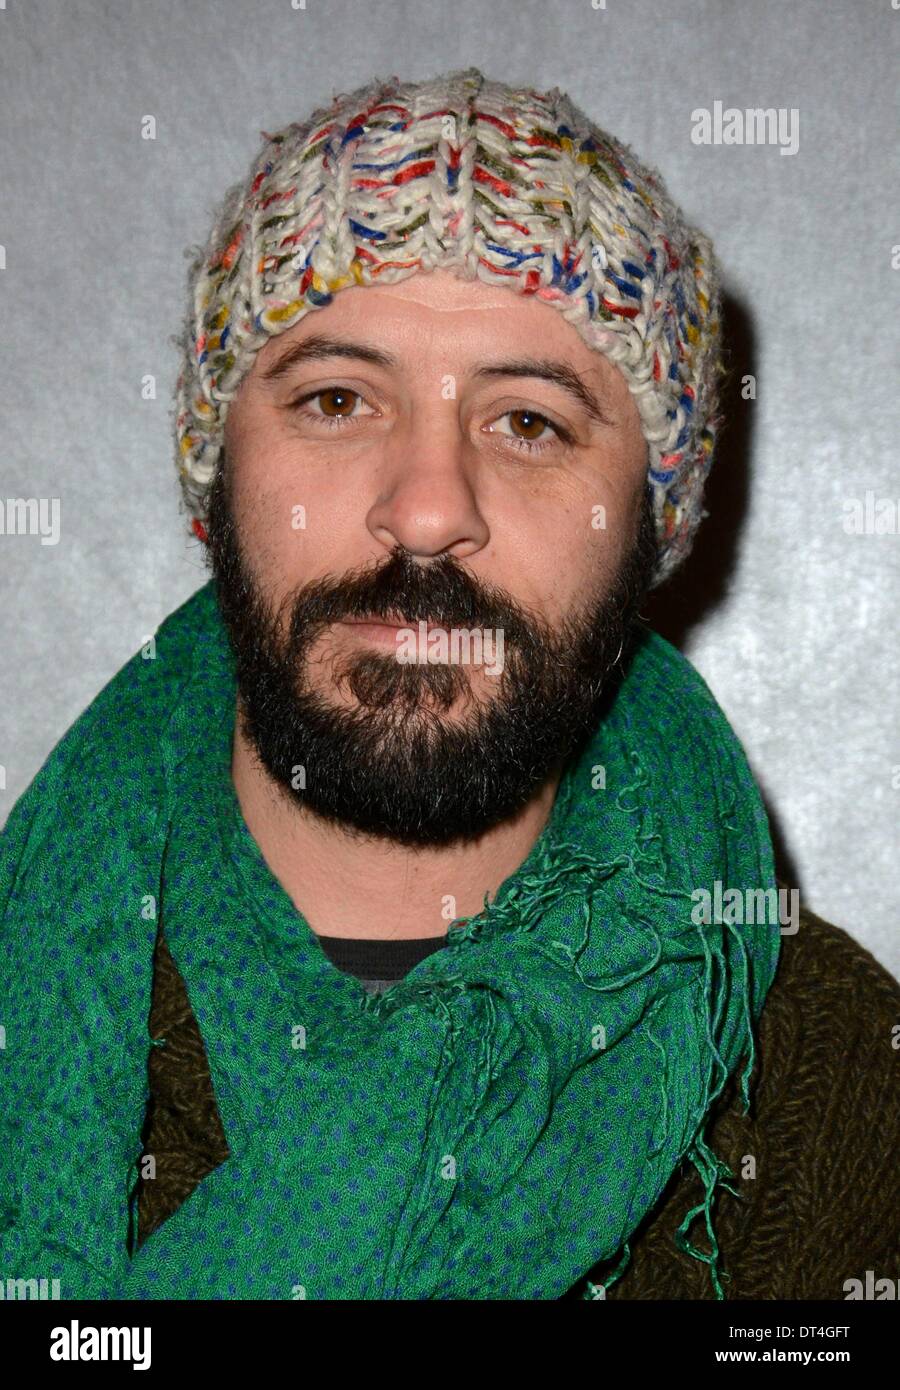 New York, NY, USA. 7th Feb, 2014. Ali Suliman at arrivals for MARS AT SUNRISE Premiere Screening, The Quad Cinema, New York, NY February 7, 2014. Credit:  Derek Storm/Everett Collection/Alamy Live News Stock Photo